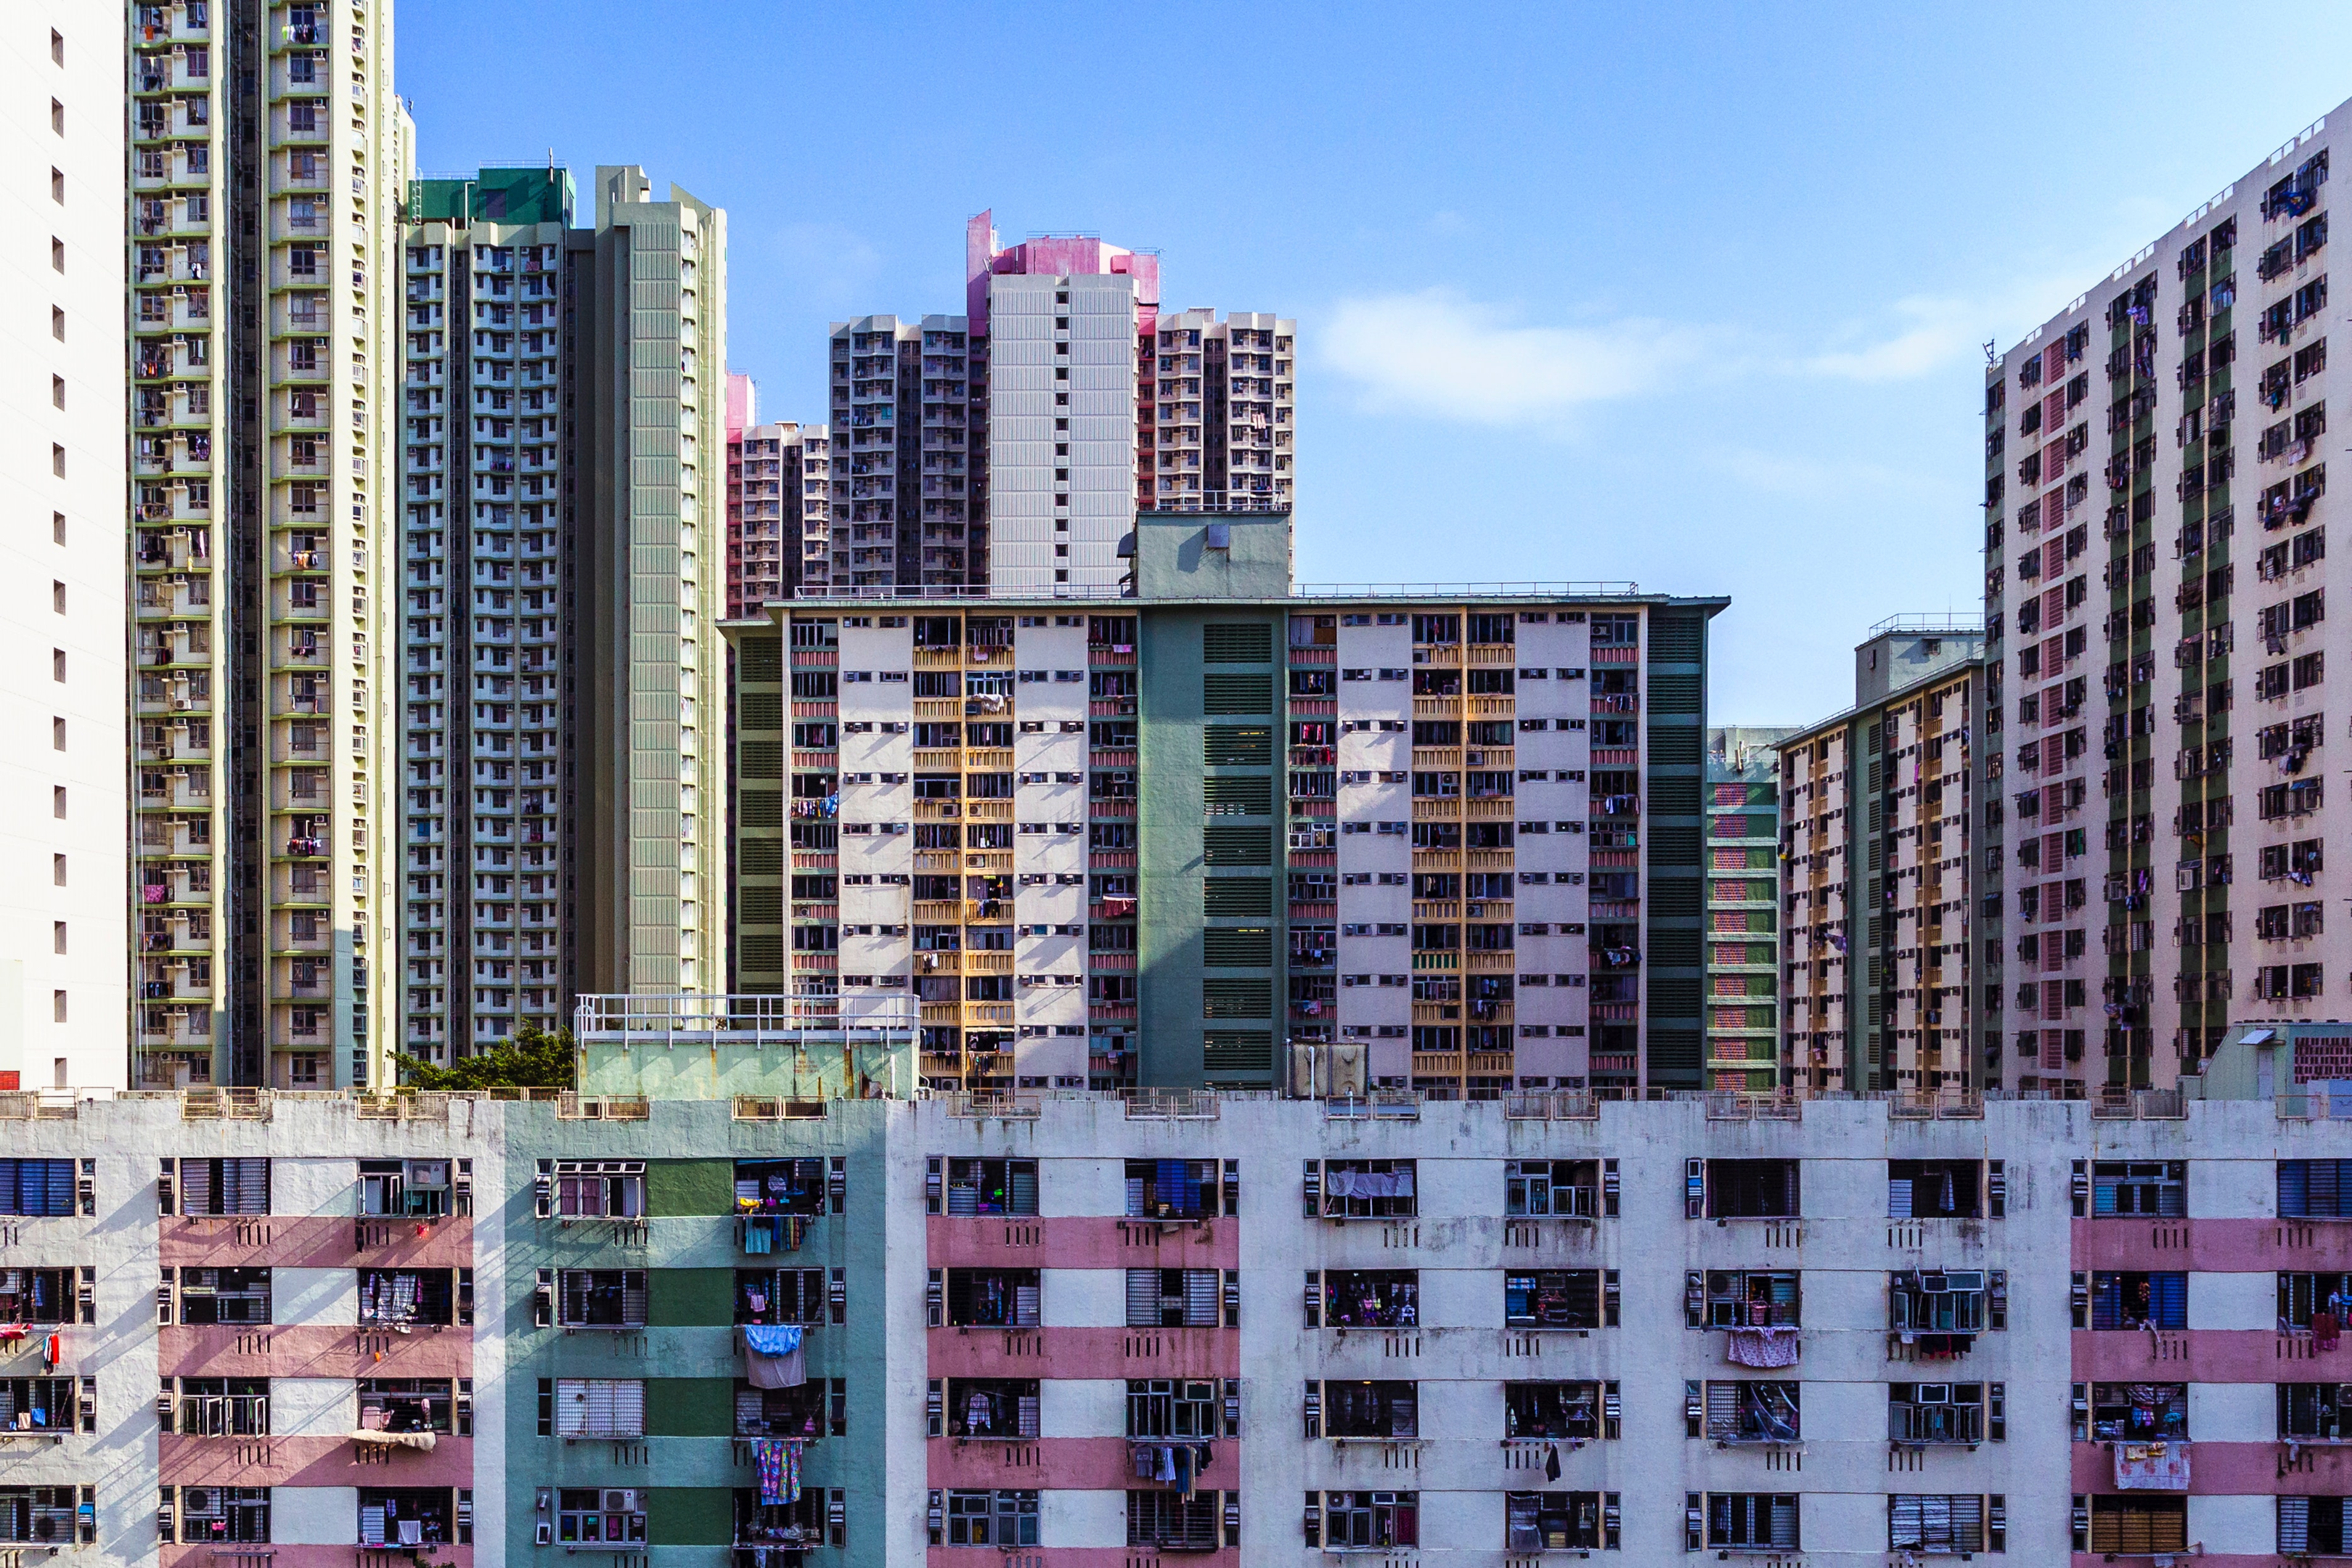 The law set a standard regarding the dissolution of a condo project